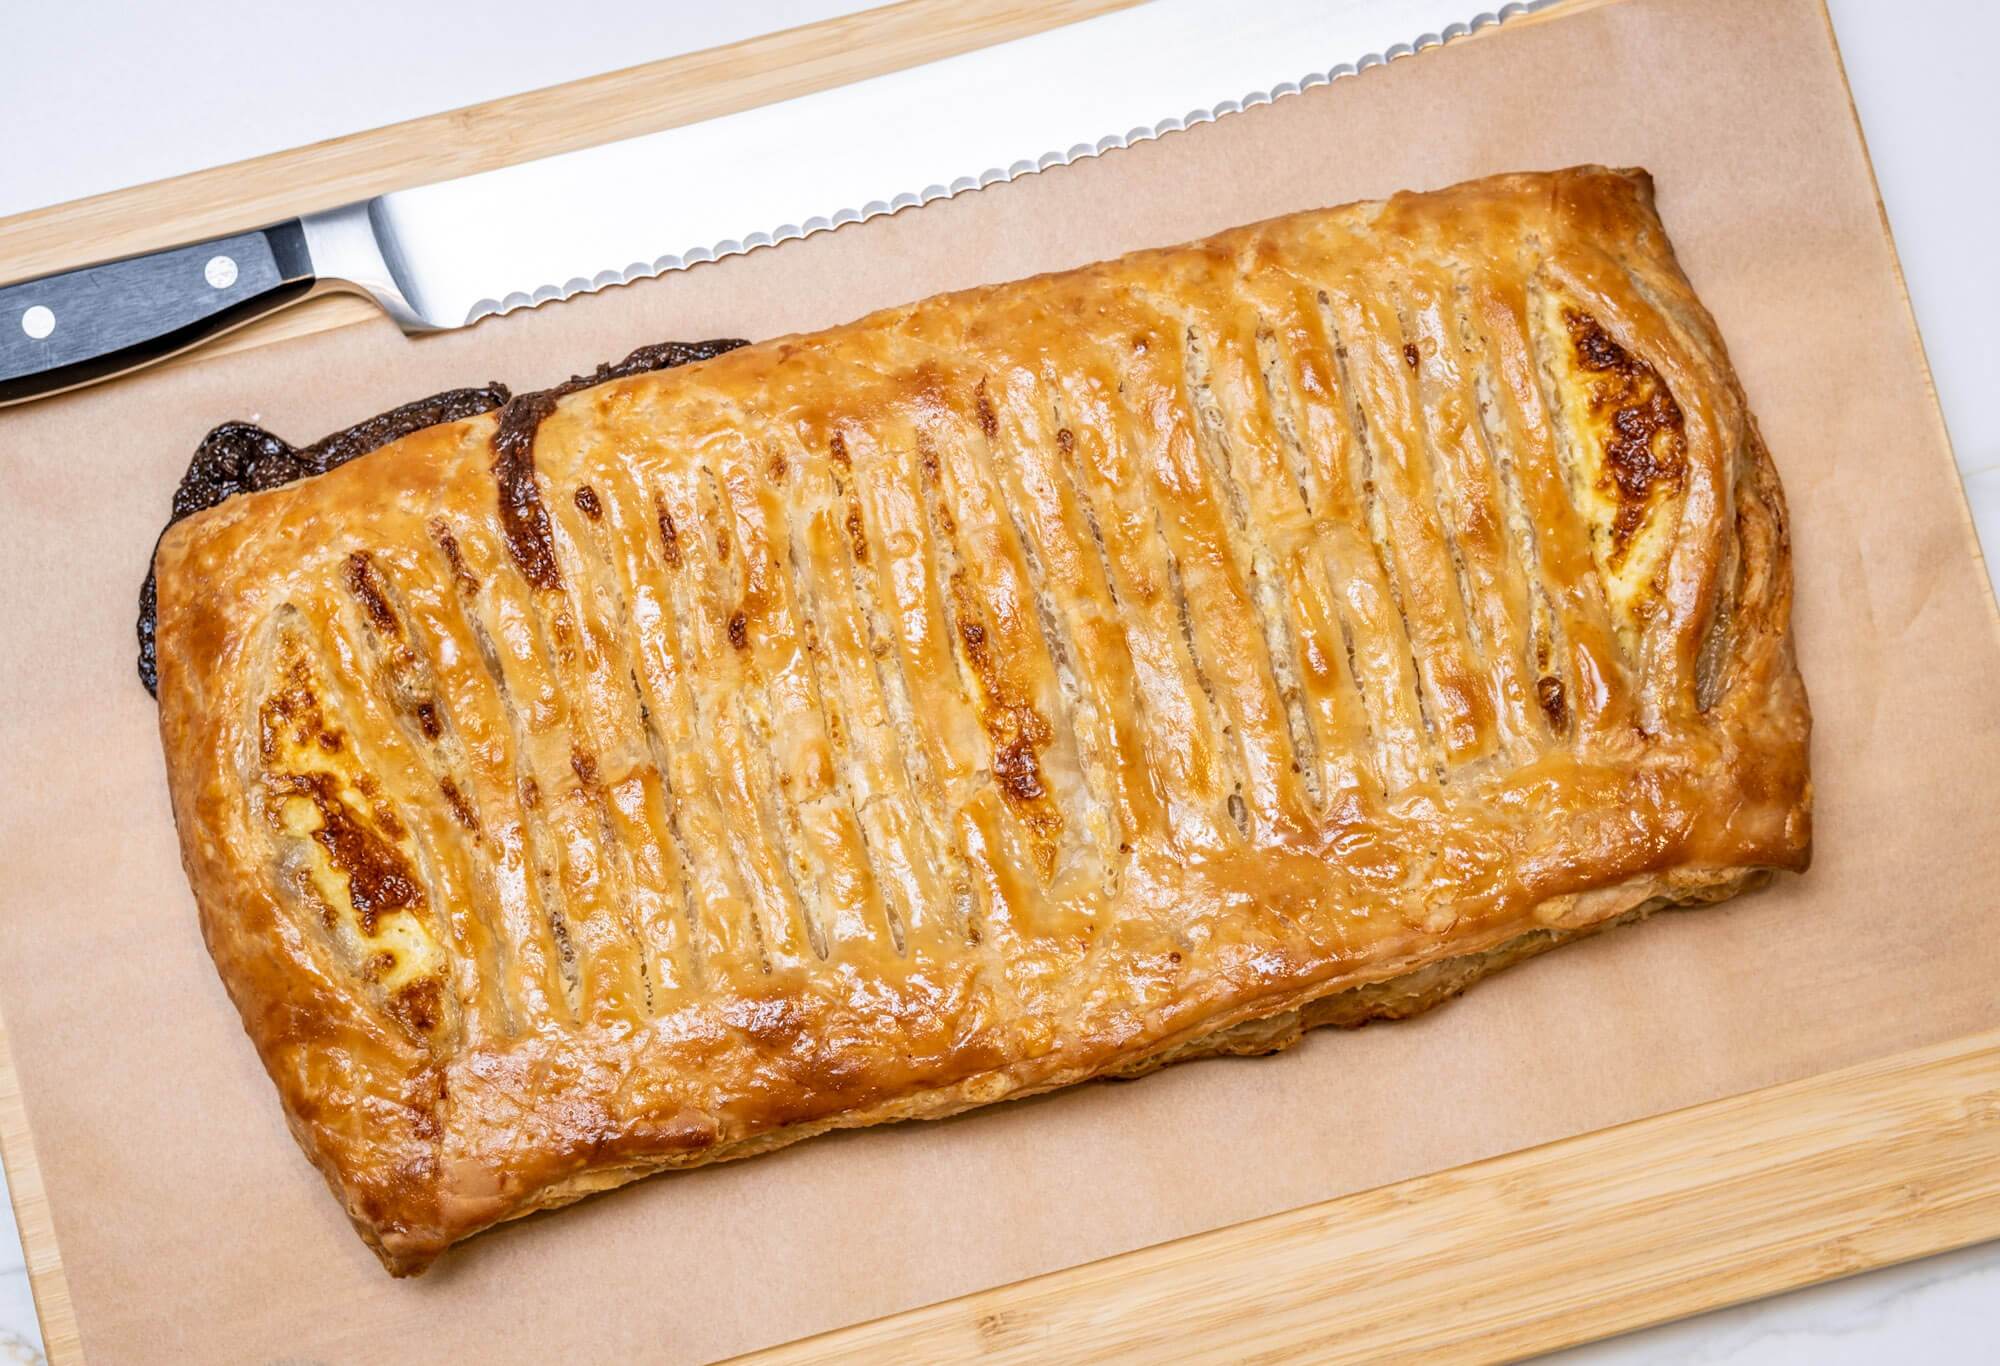 Jalousie au fromage, a savoury blue cheese tart using puff pastry